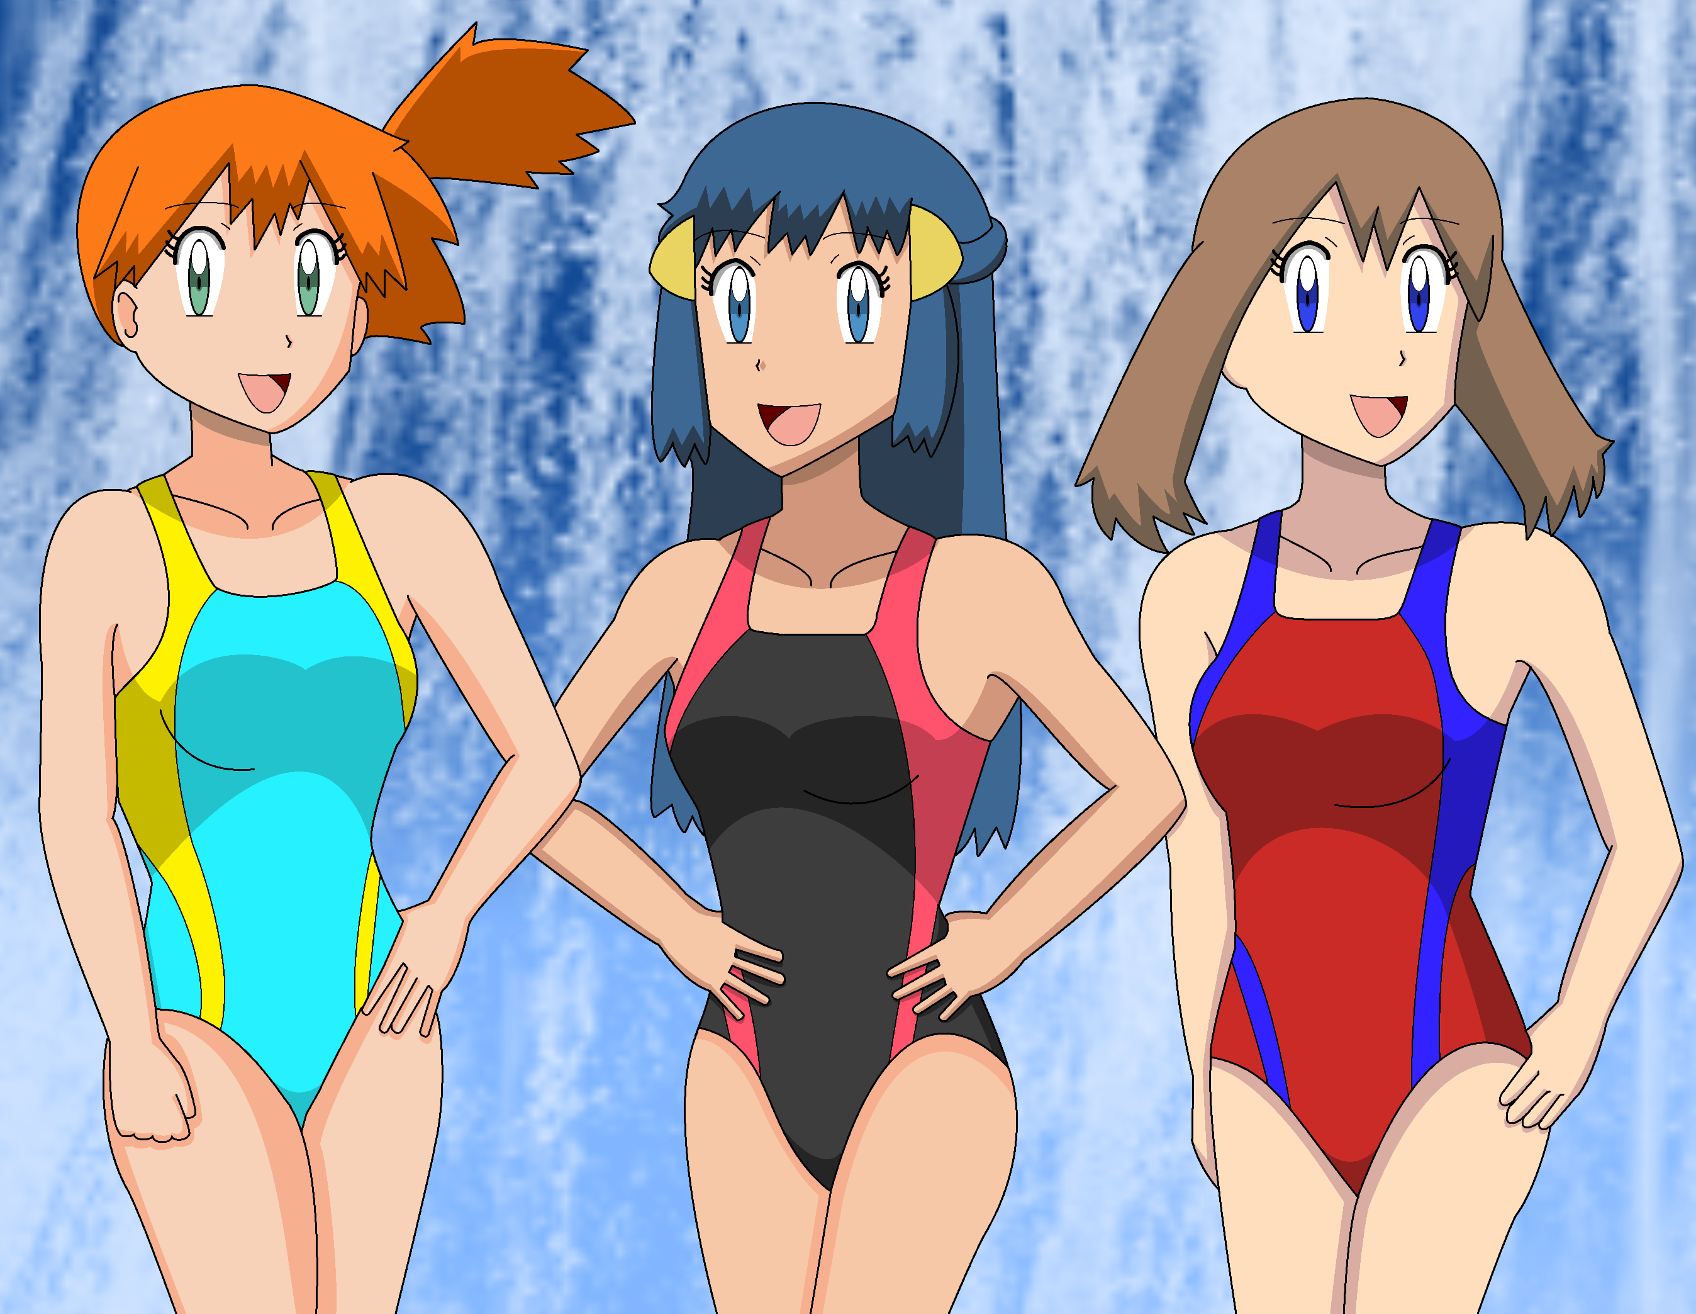 CycleShipping Swimsuit Models by RevolutionHellCowboy